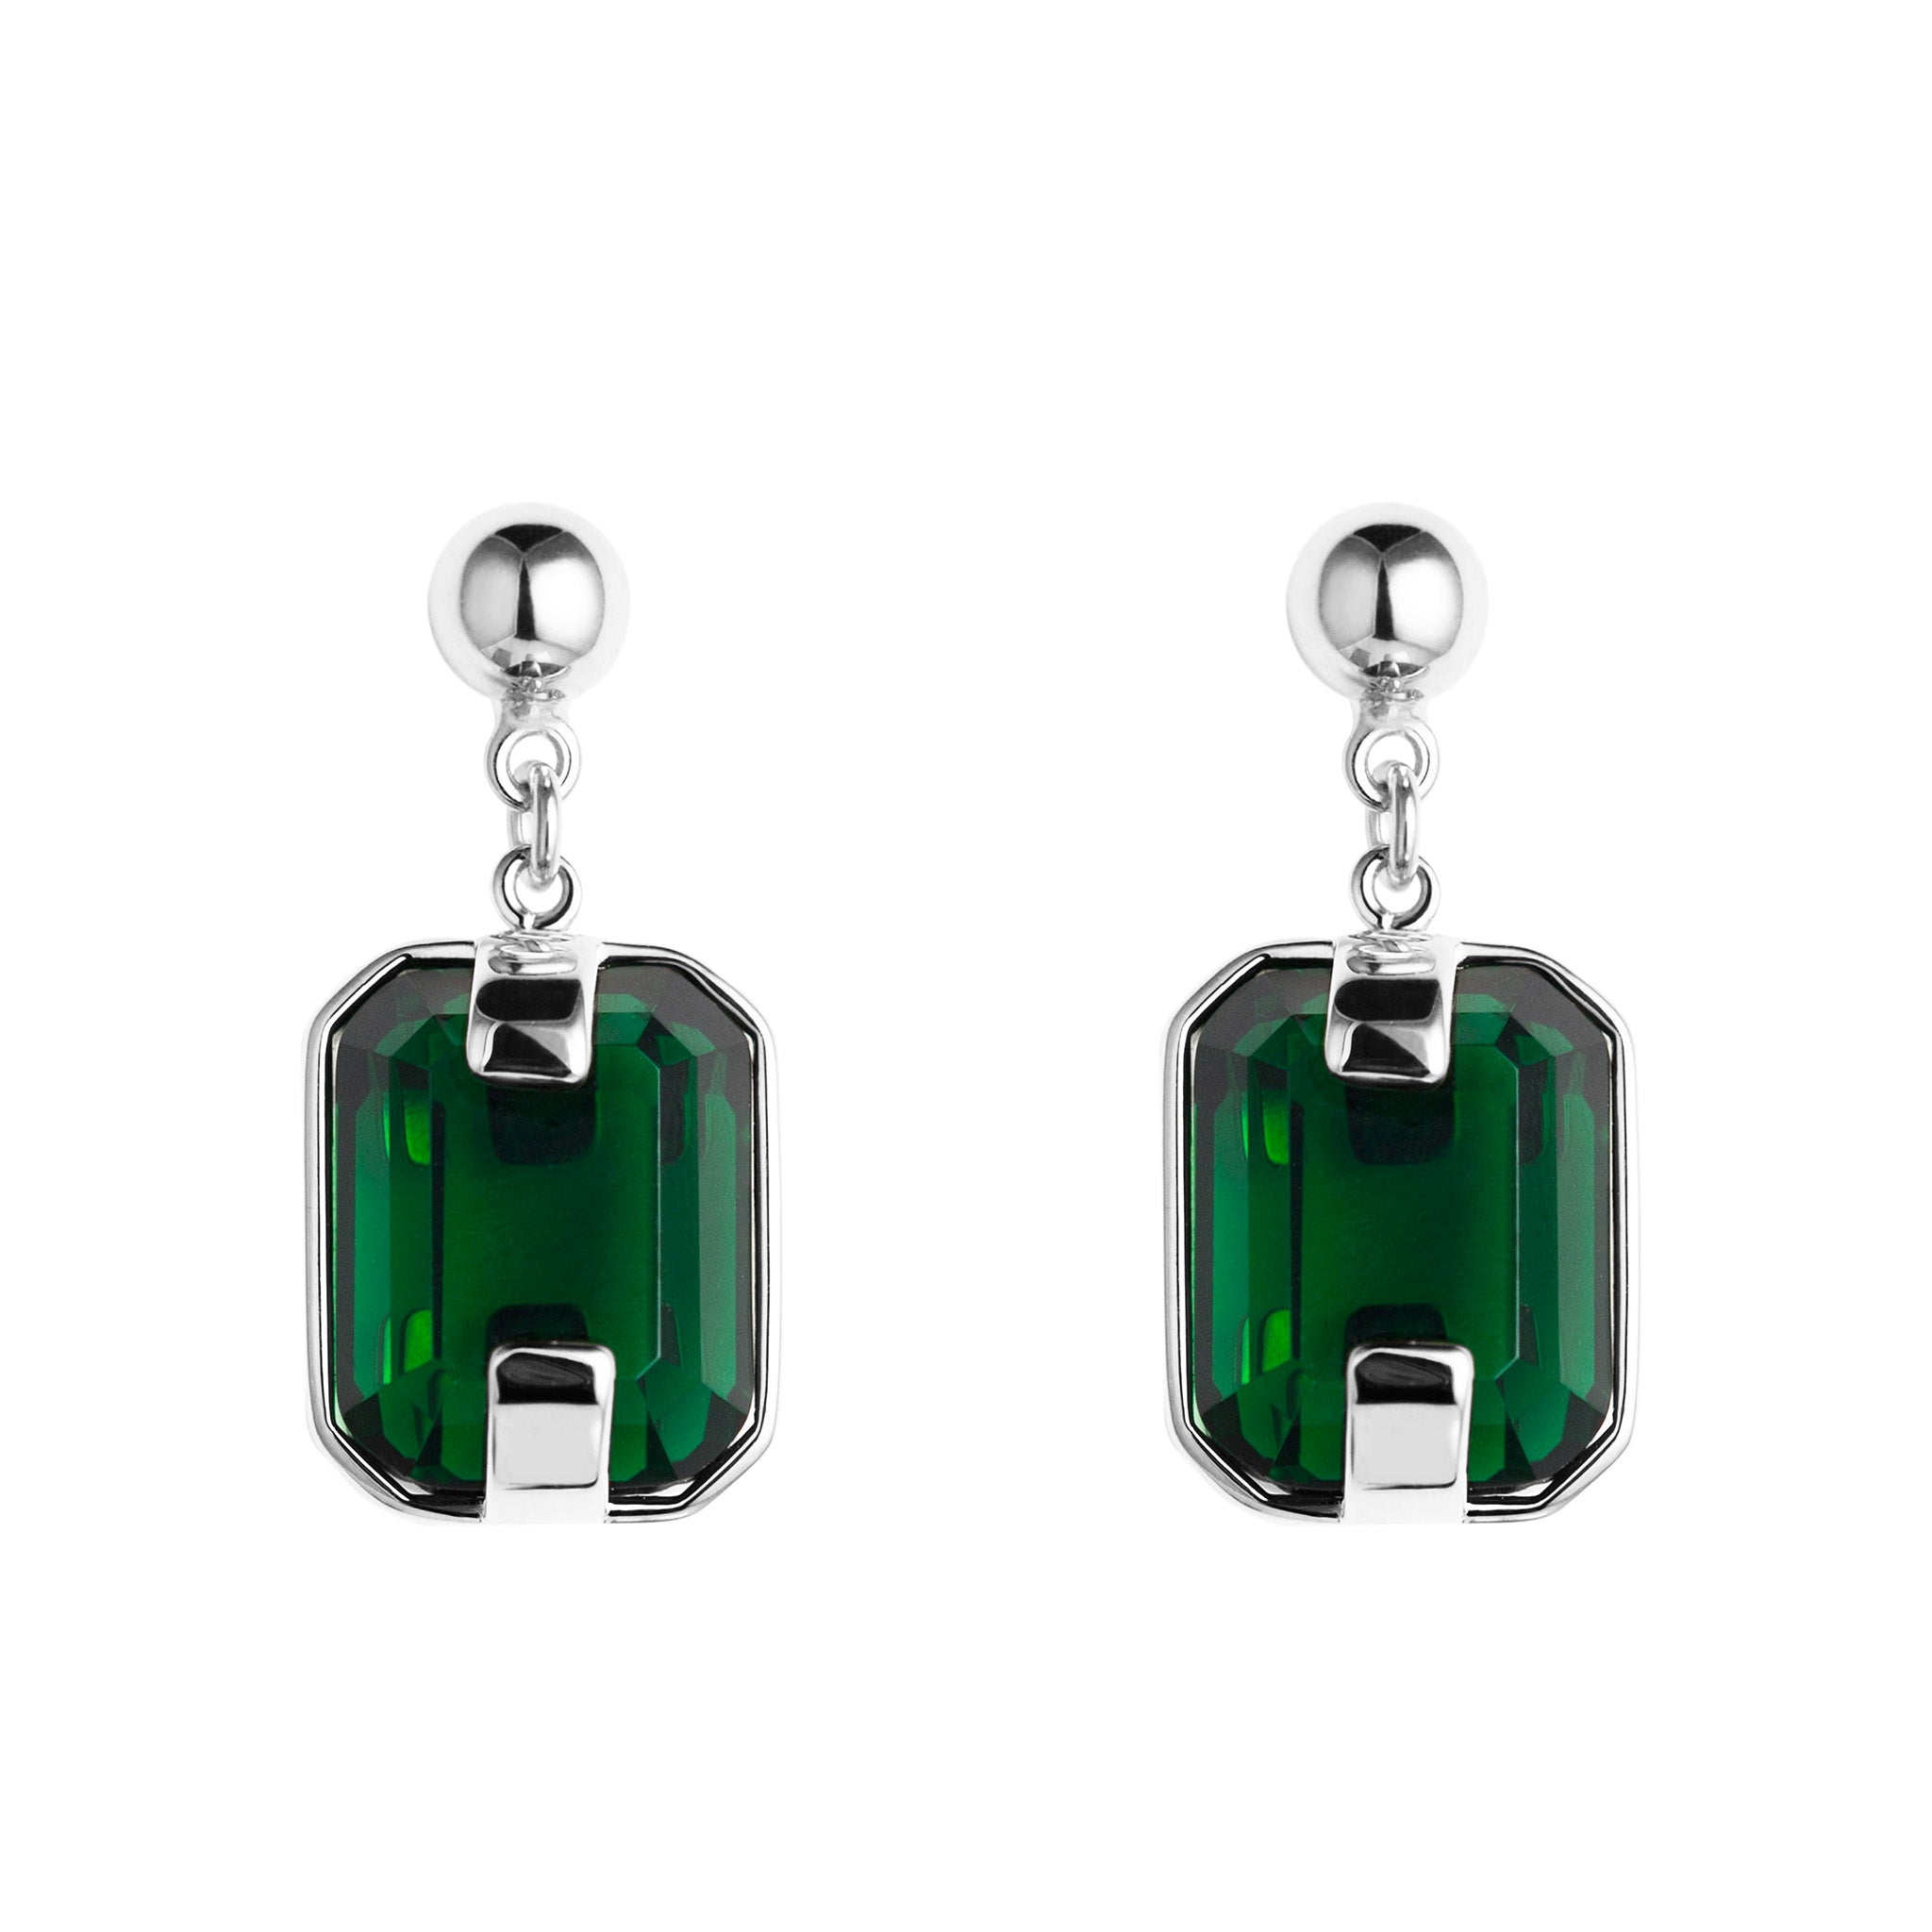 Earrings with green crystals